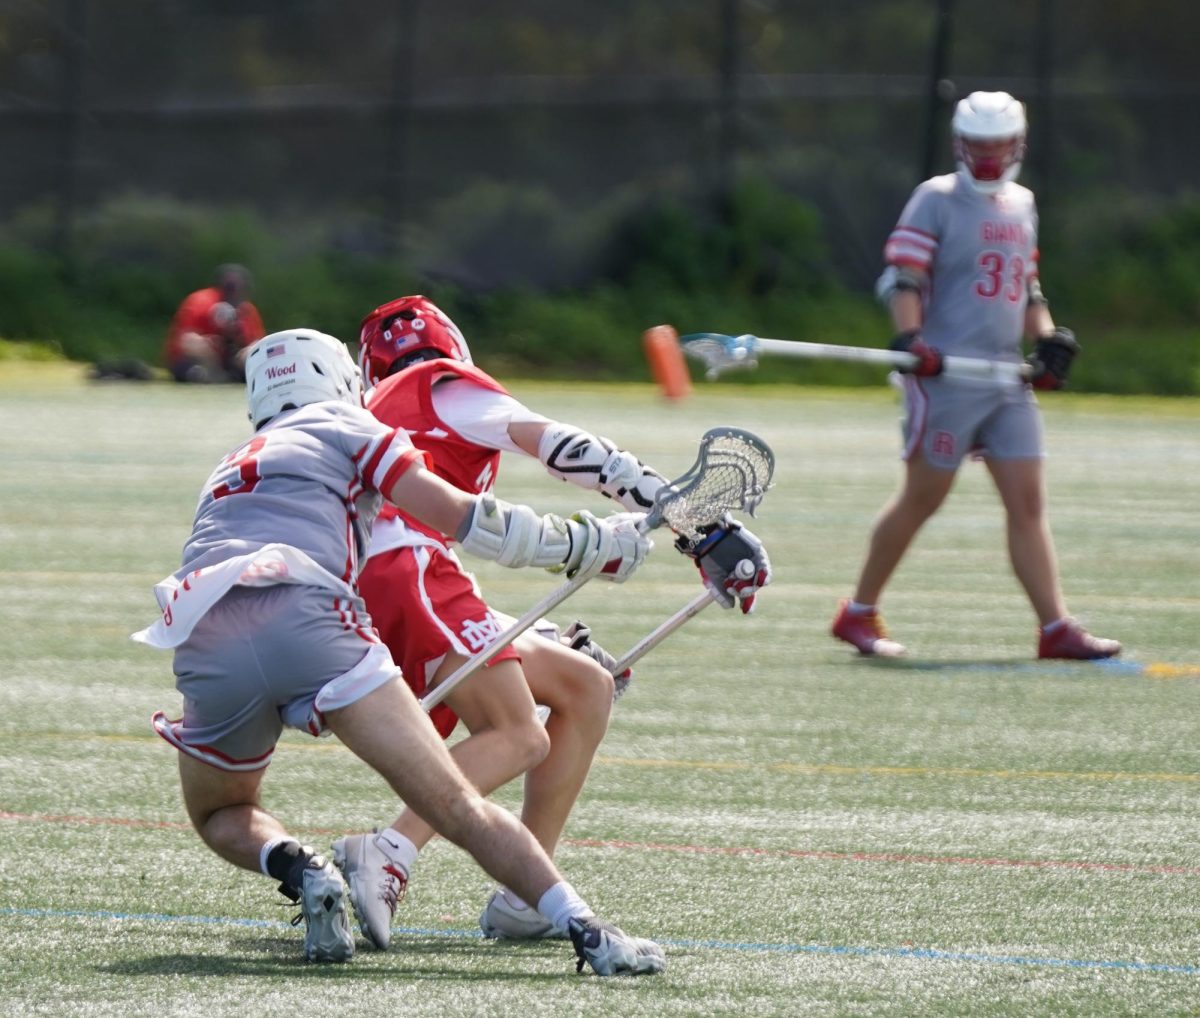 A close game between Redwood Boys Lacrosse and Mater Dei. Photo Courtesy of Blake Atkins and Mark Holmstrom